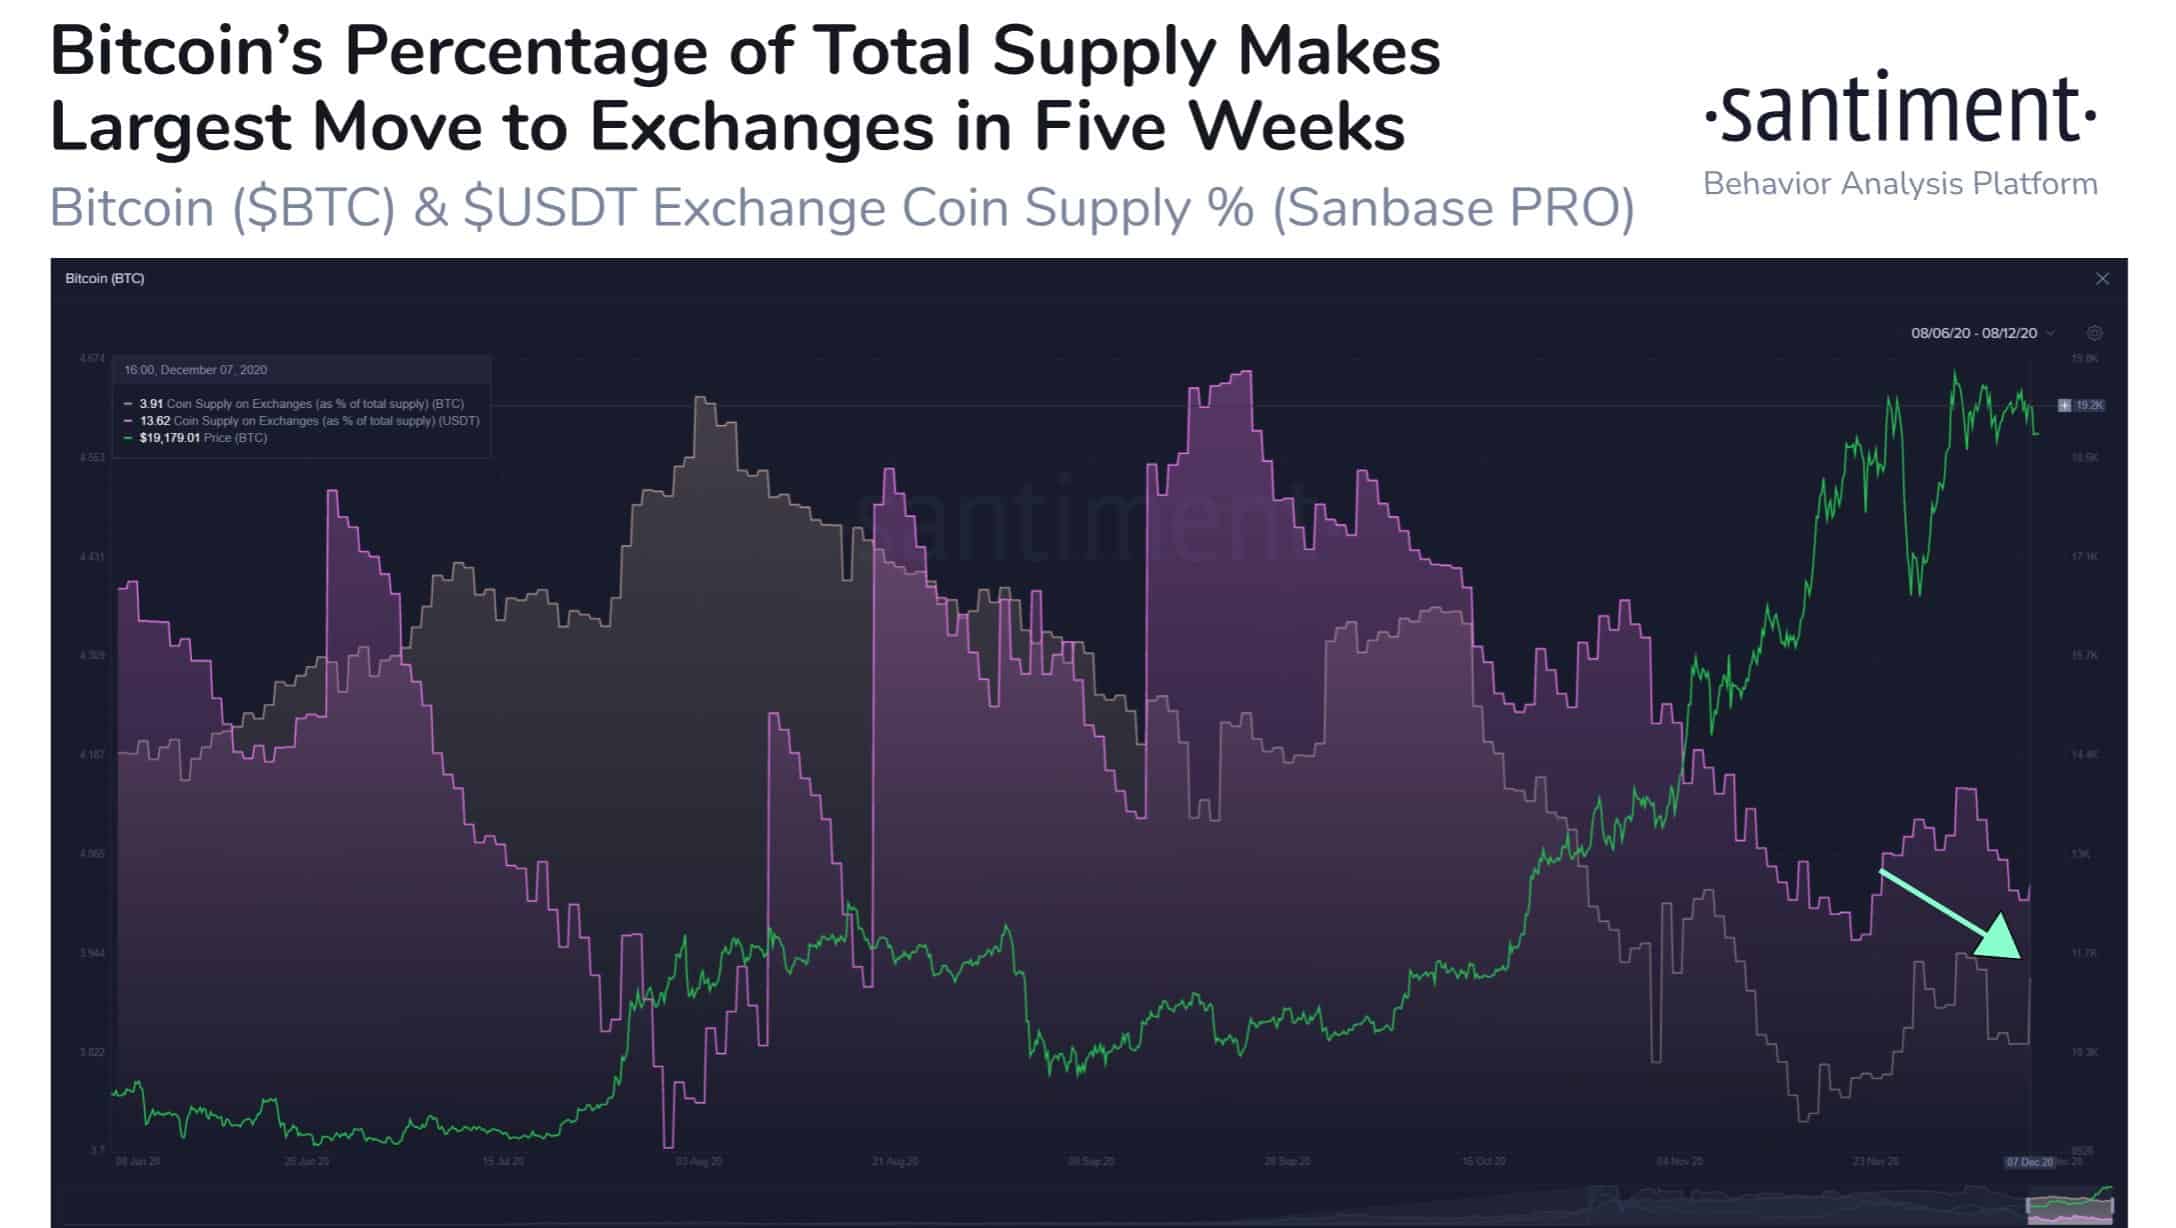 Bitcoin Price/Bitcoins Stored On Wallet/Exchanges. Source: Santiment